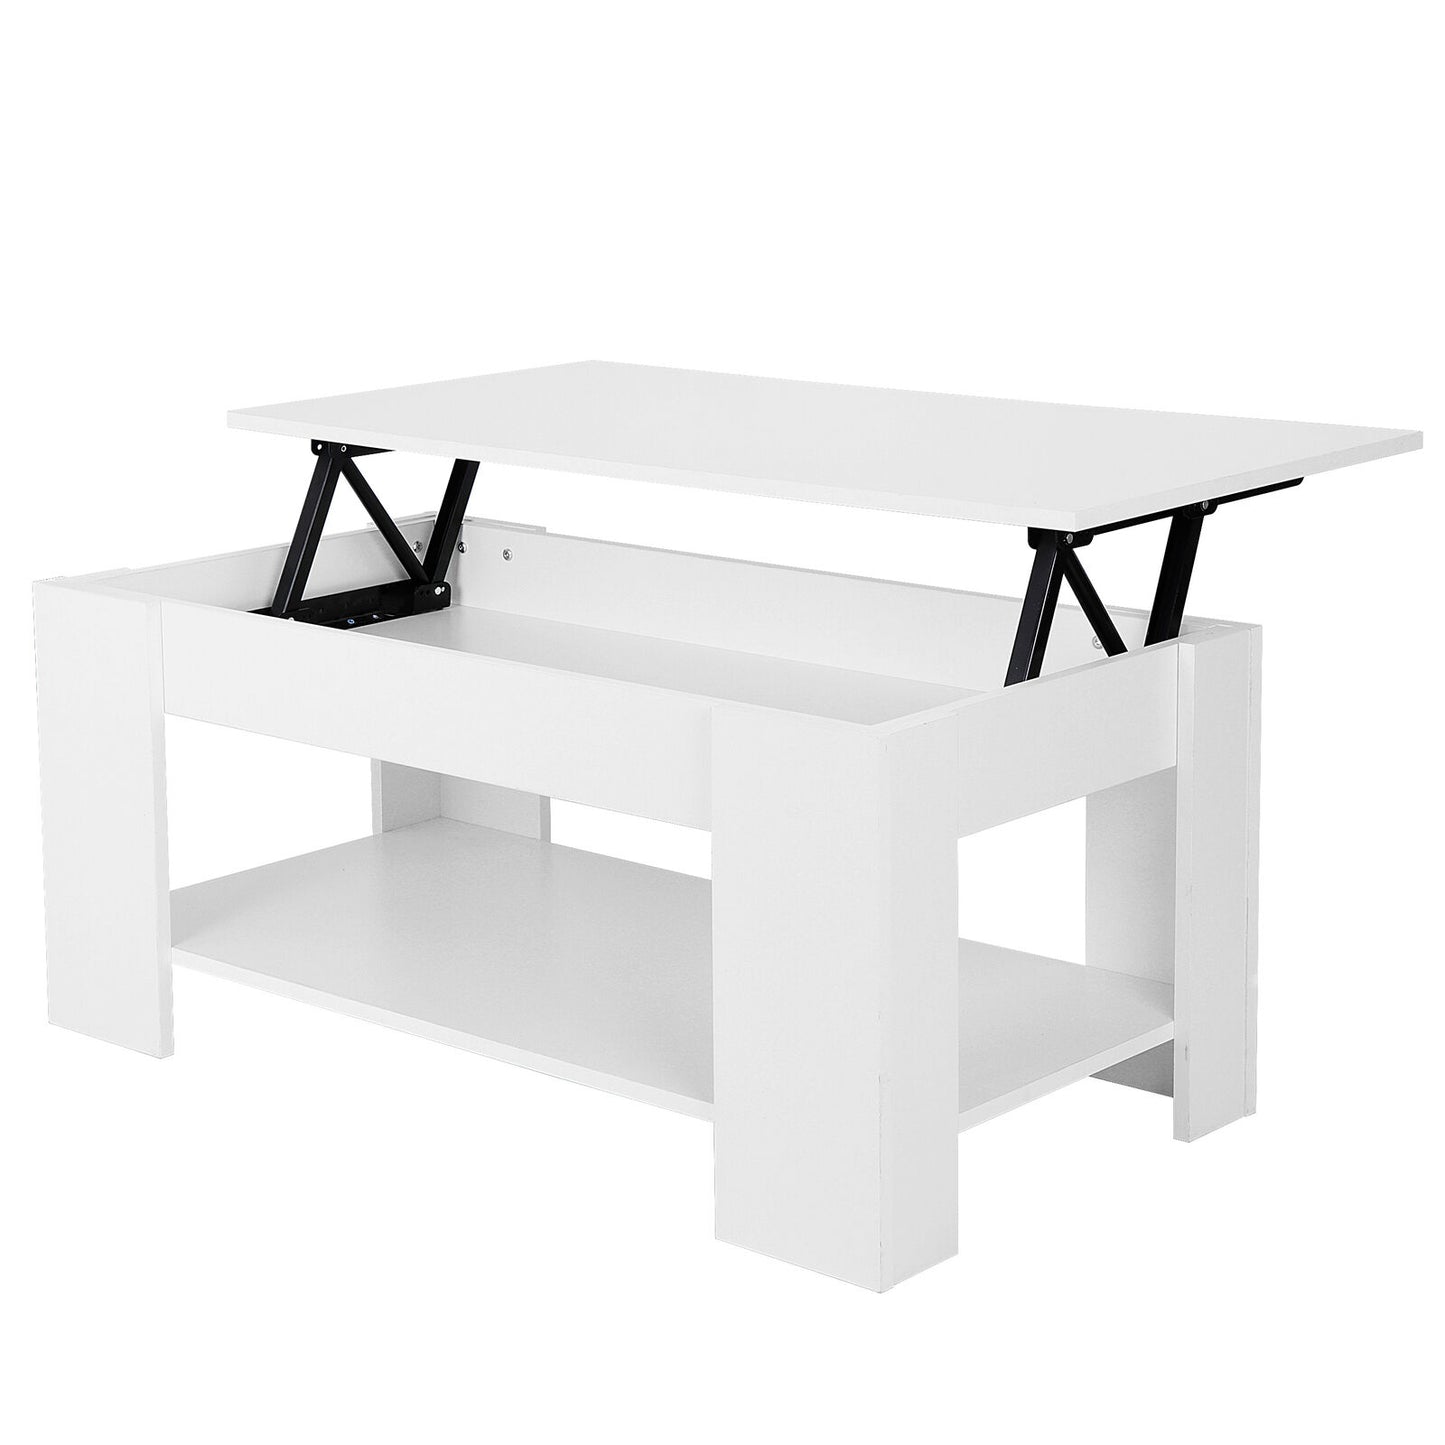 Modern Lift-up Top Tea Coffee Table Hidden Storage Compartment Furniture White